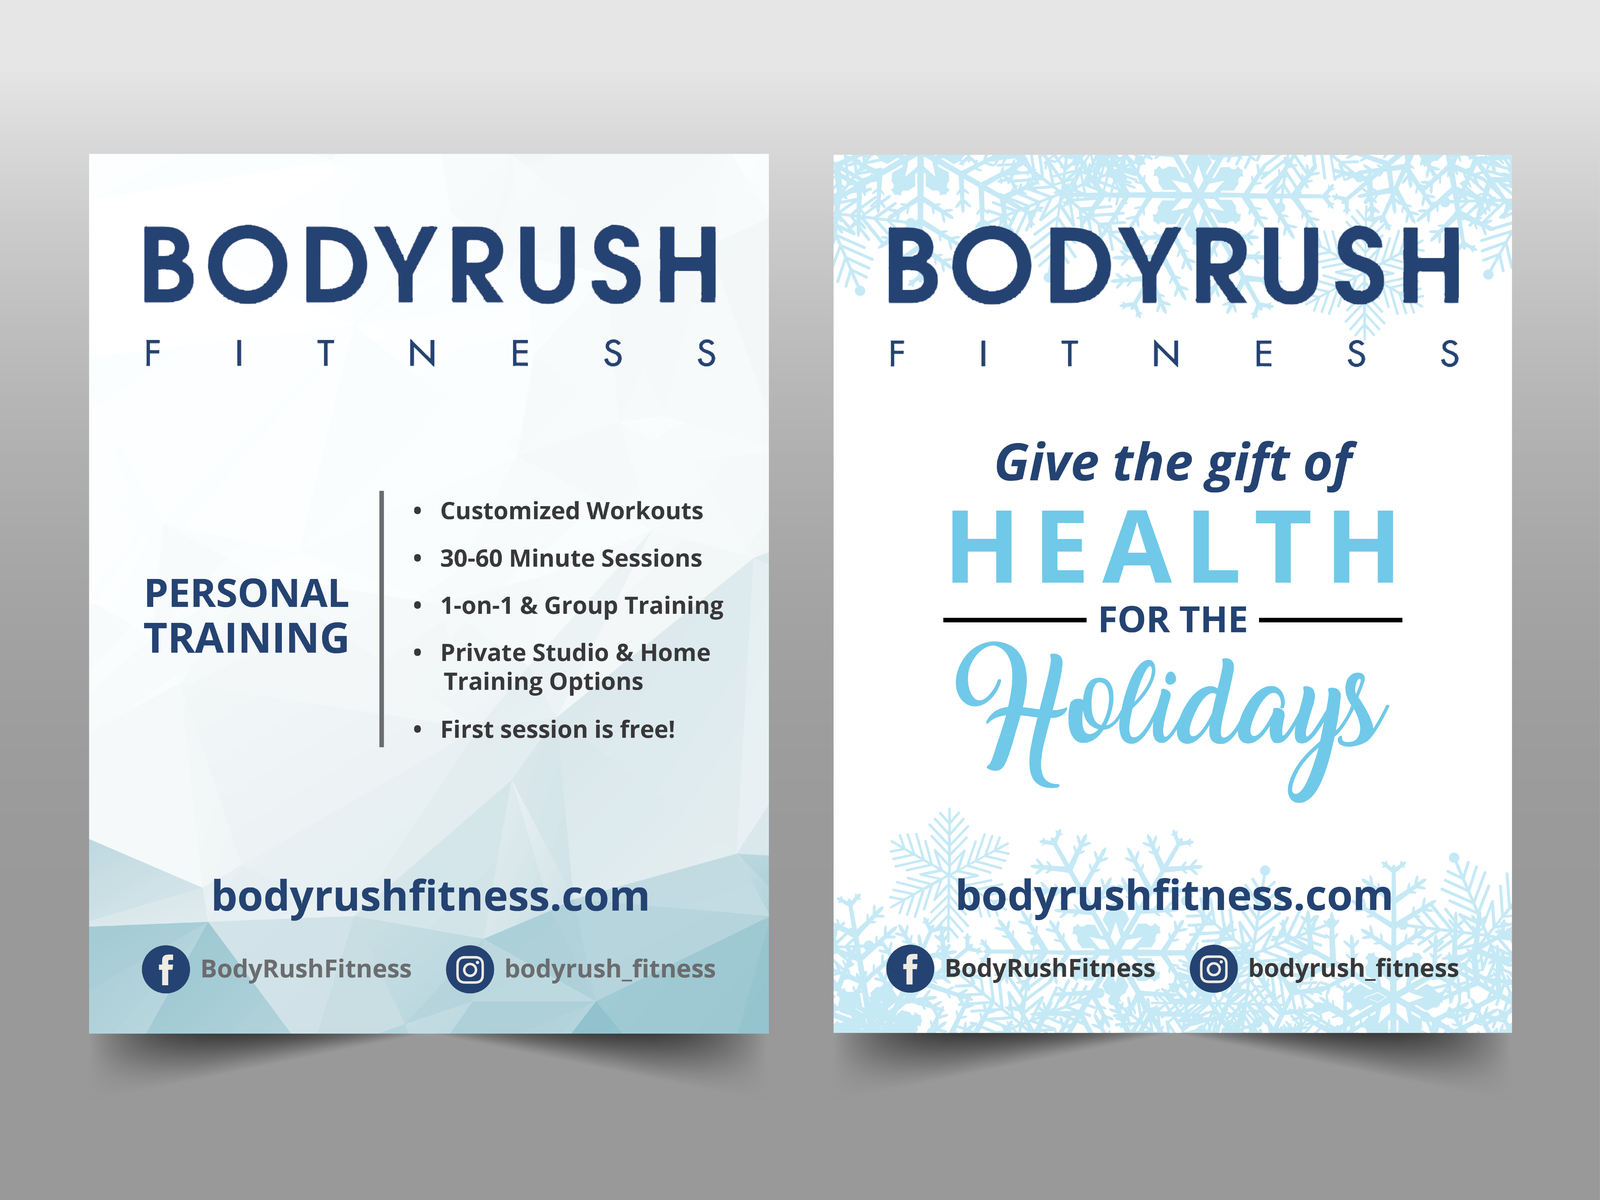 Bodyrush Fitness Flyers By Meredith Mcnulty On Dribbble